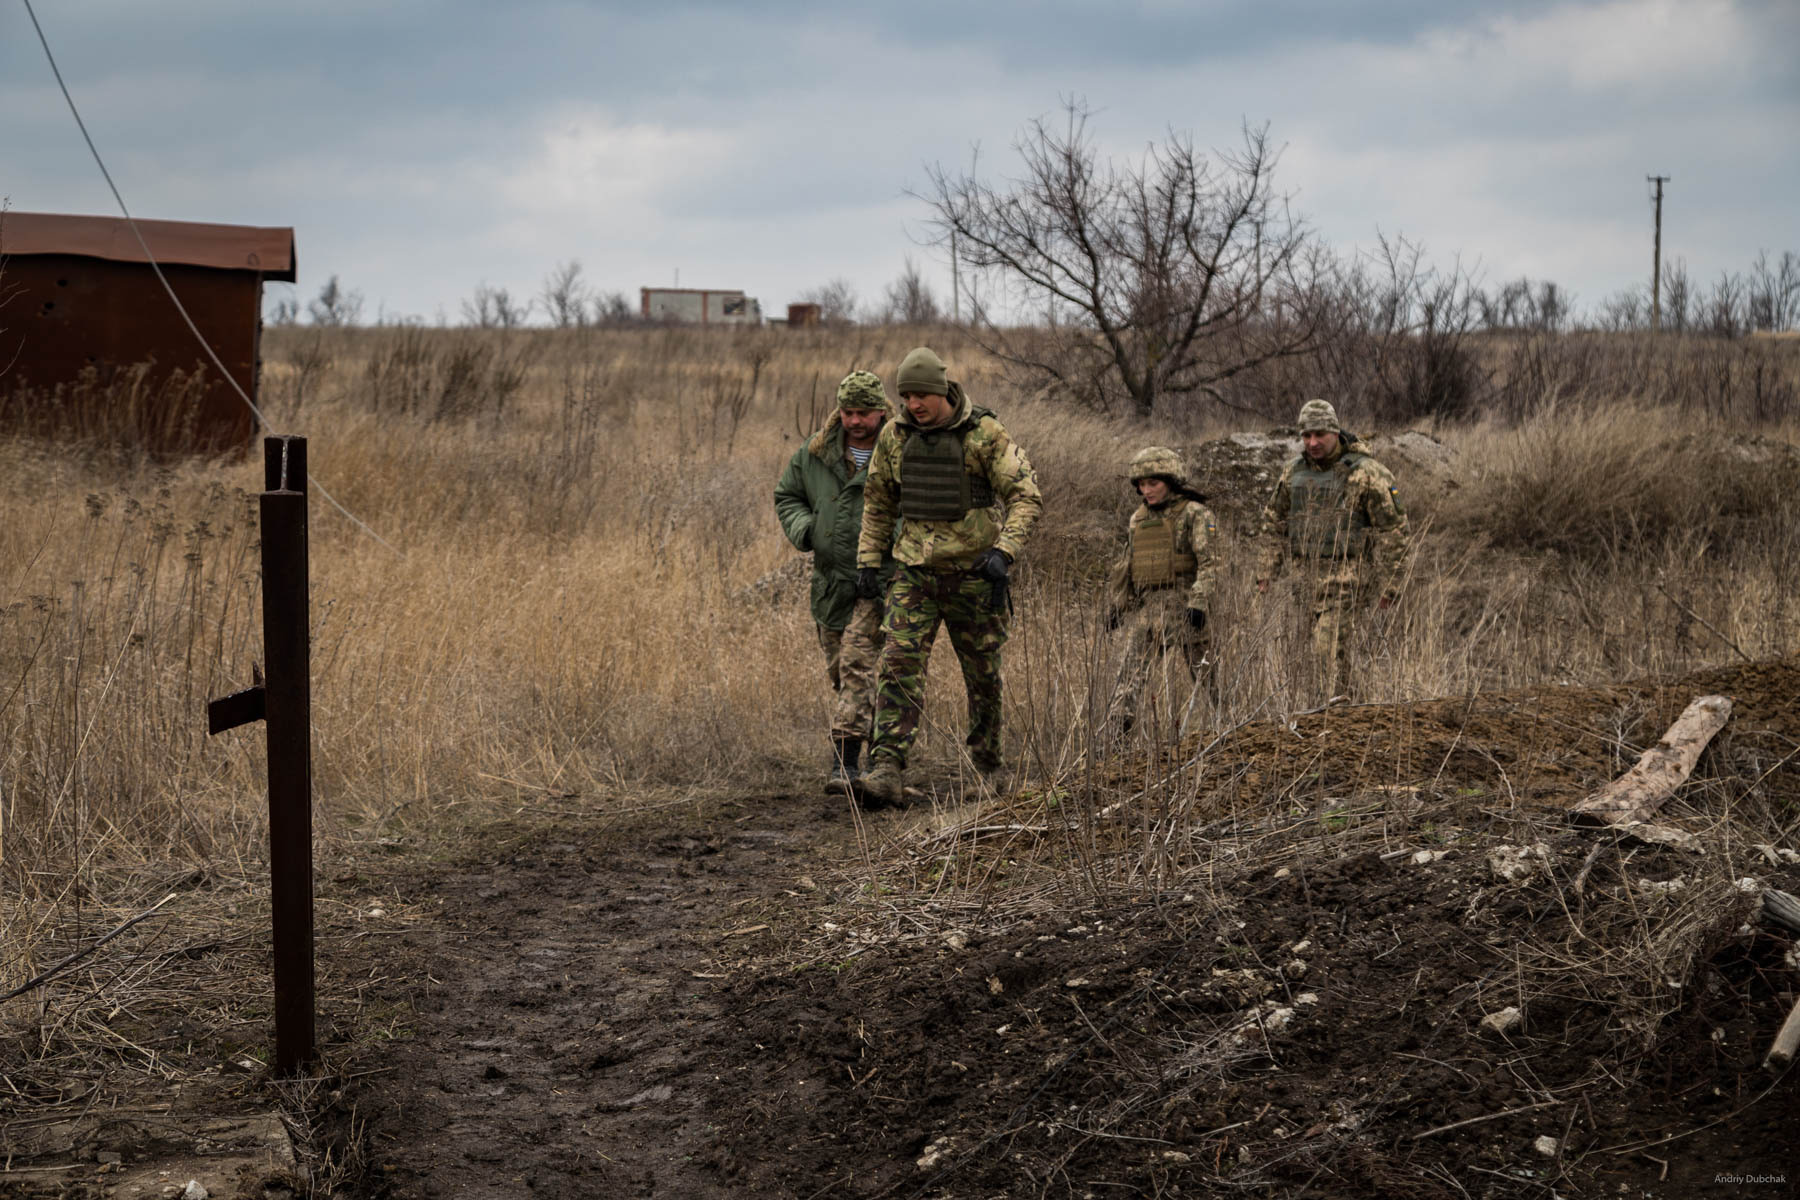 "The brass has arrived". Squadron commander, Victor Sikoza, company commander, Alexander, press officer ,Alexander Bessmertnya, and brigade commander, Dmitry Deliatitsky, are going to examine how they strengthened the recently occupied "nuli" position on the forefront in Shirokine. Read: Brigade commander of Marines, Dmytro Deliatiatsky: "We will definitely return to our home, Crimea" - https://goo.gl/TsSs4j Shirokine, March 2018